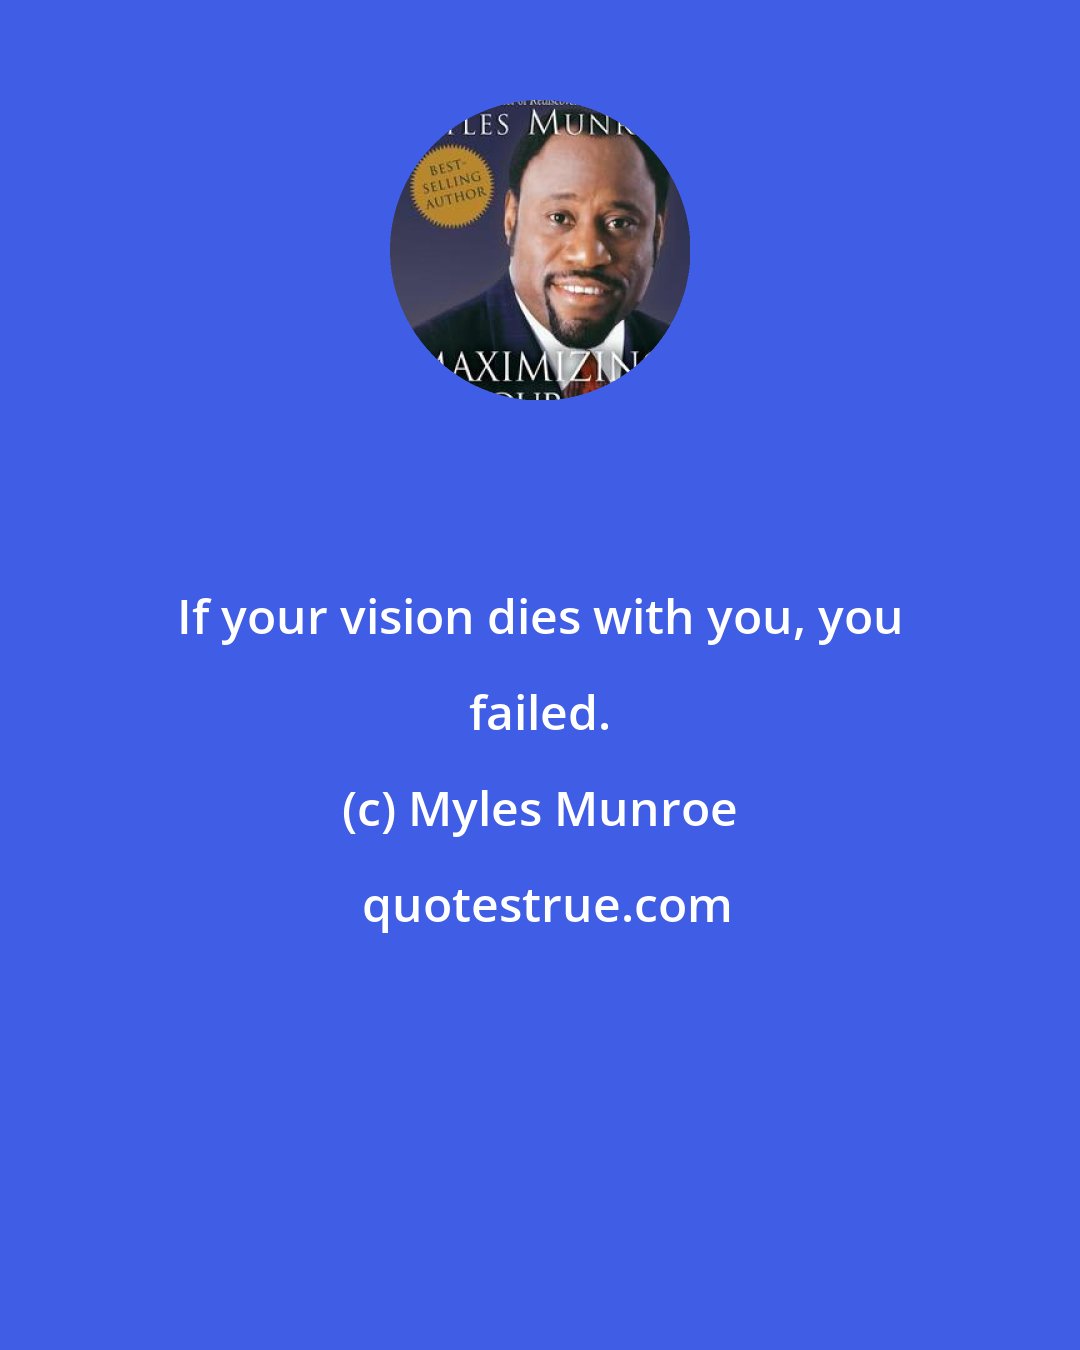 Myles Munroe: If your vision dies with you, you failed.